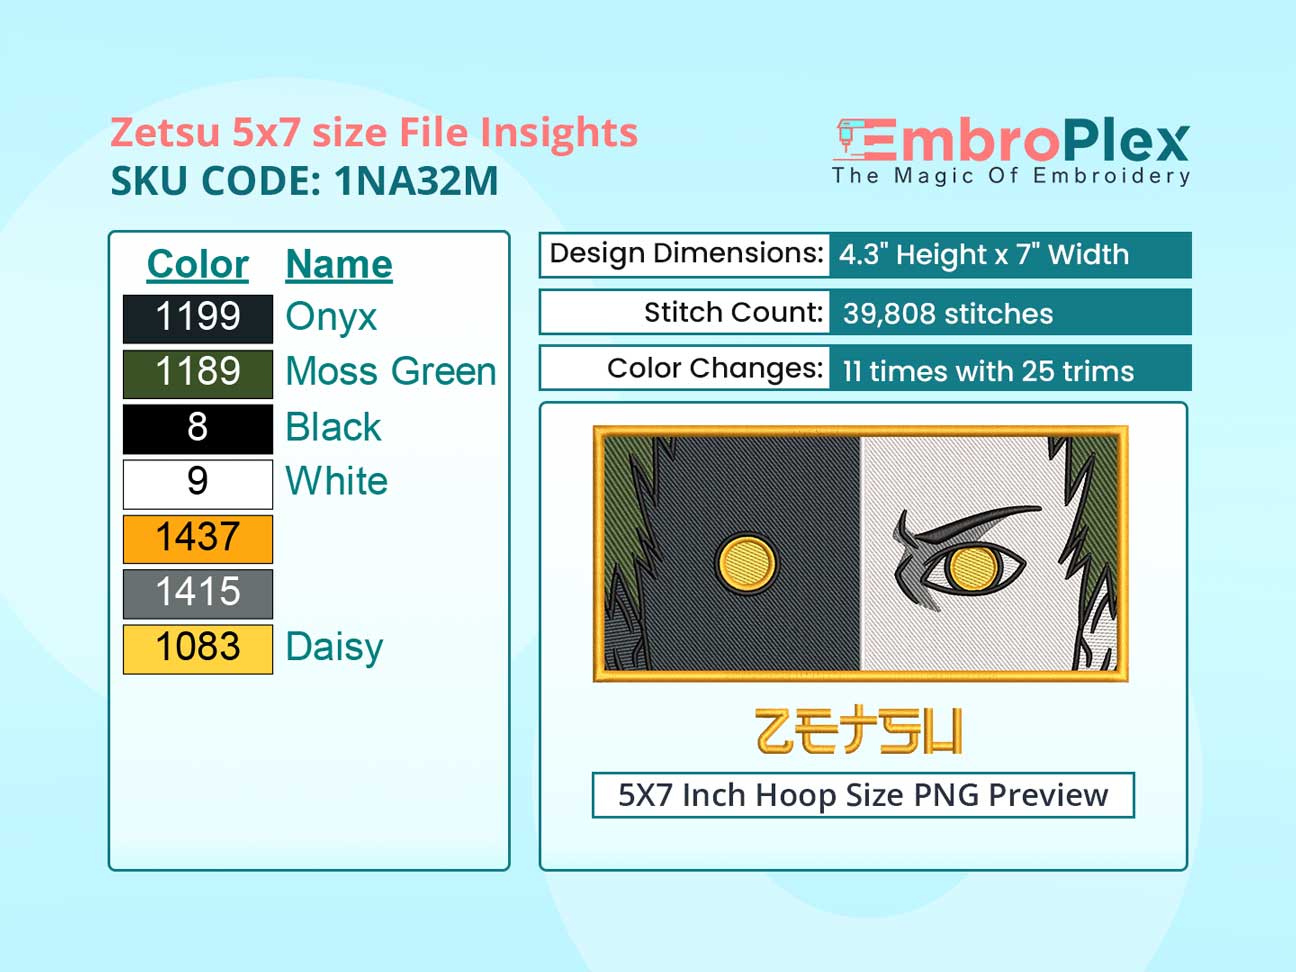 Anime-Inspired Zetsu Embroidery Design File - 5x7 Inch hoop Size Variation overview image